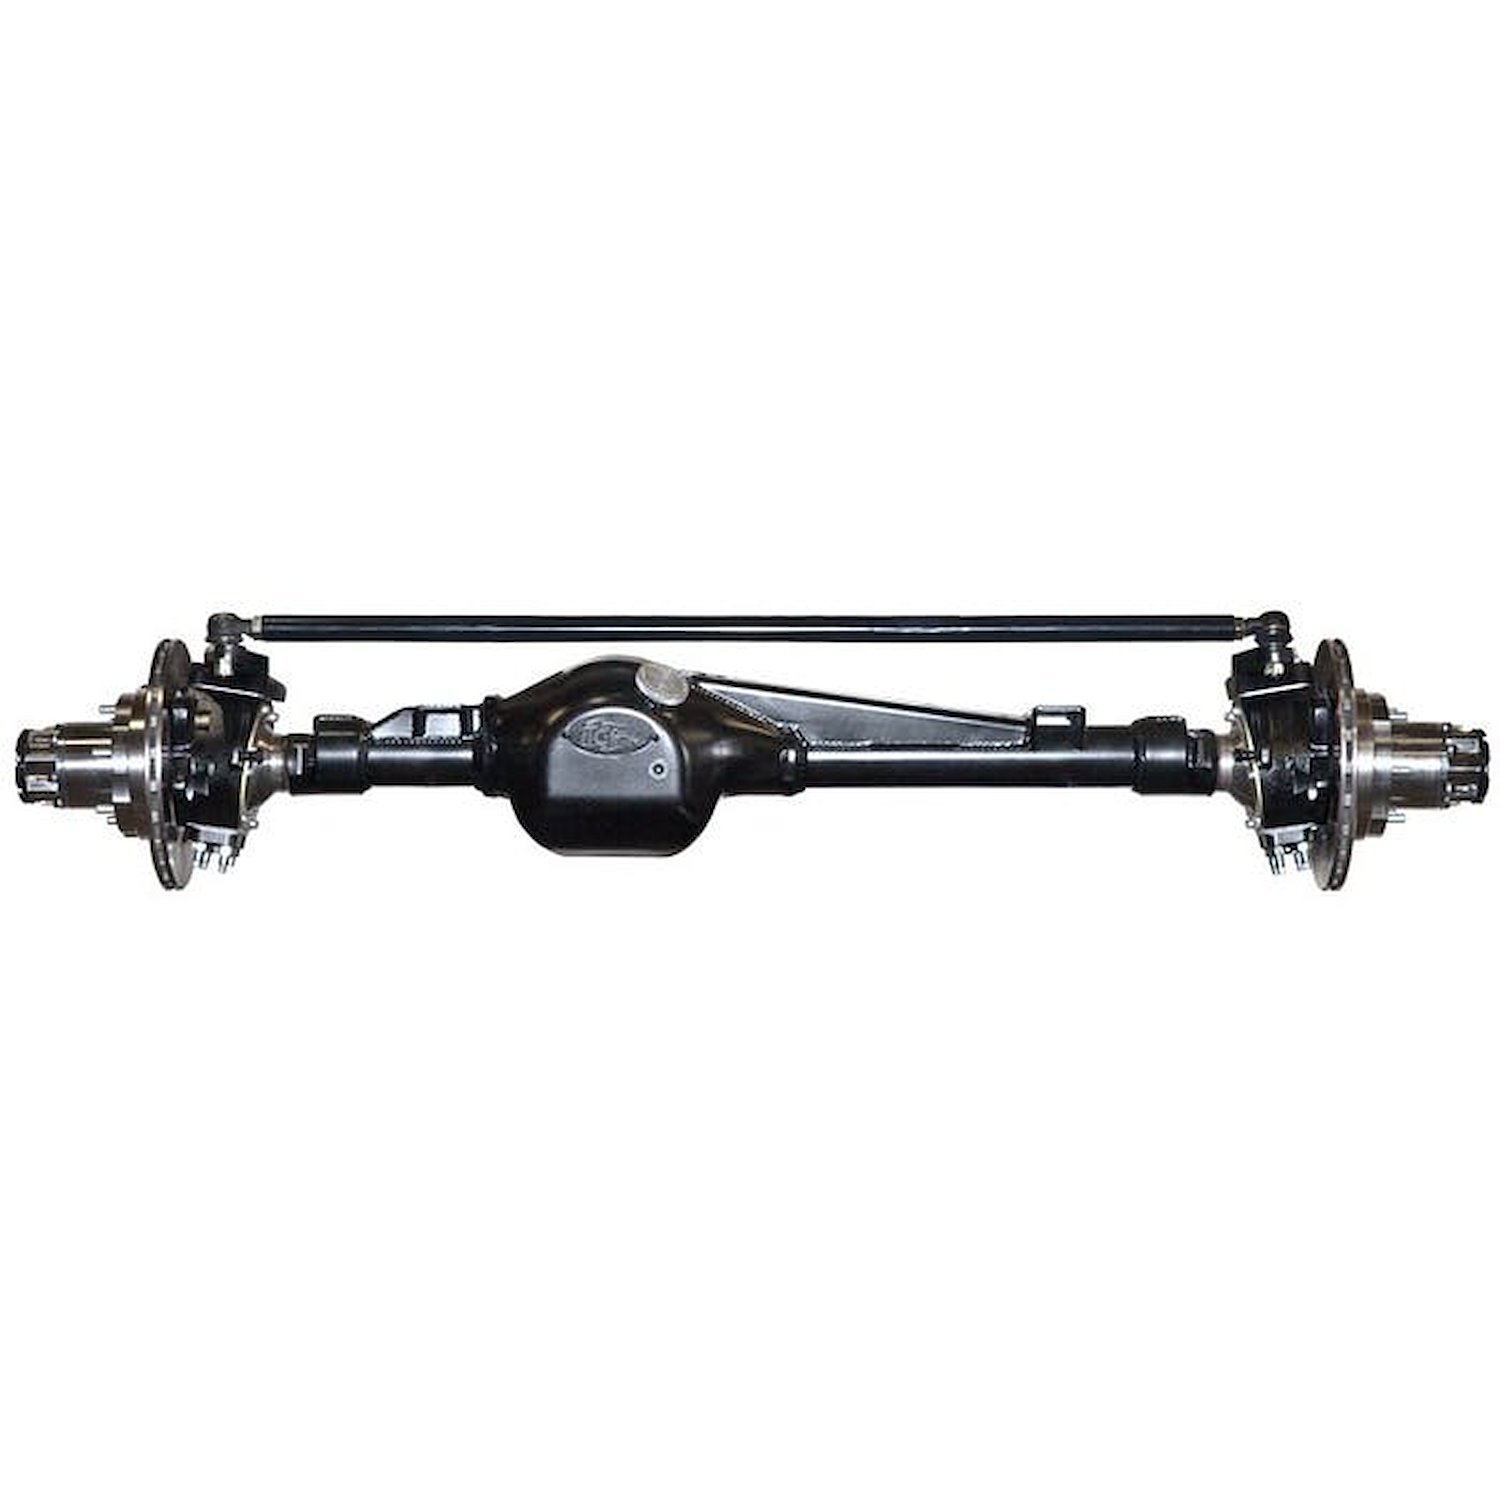 301650-1-KIT Rock Assault Fully-Built Front Axles, +5 Width, RHD, V6, 4.88, Grizzly, Creeper Flanges, Toyota